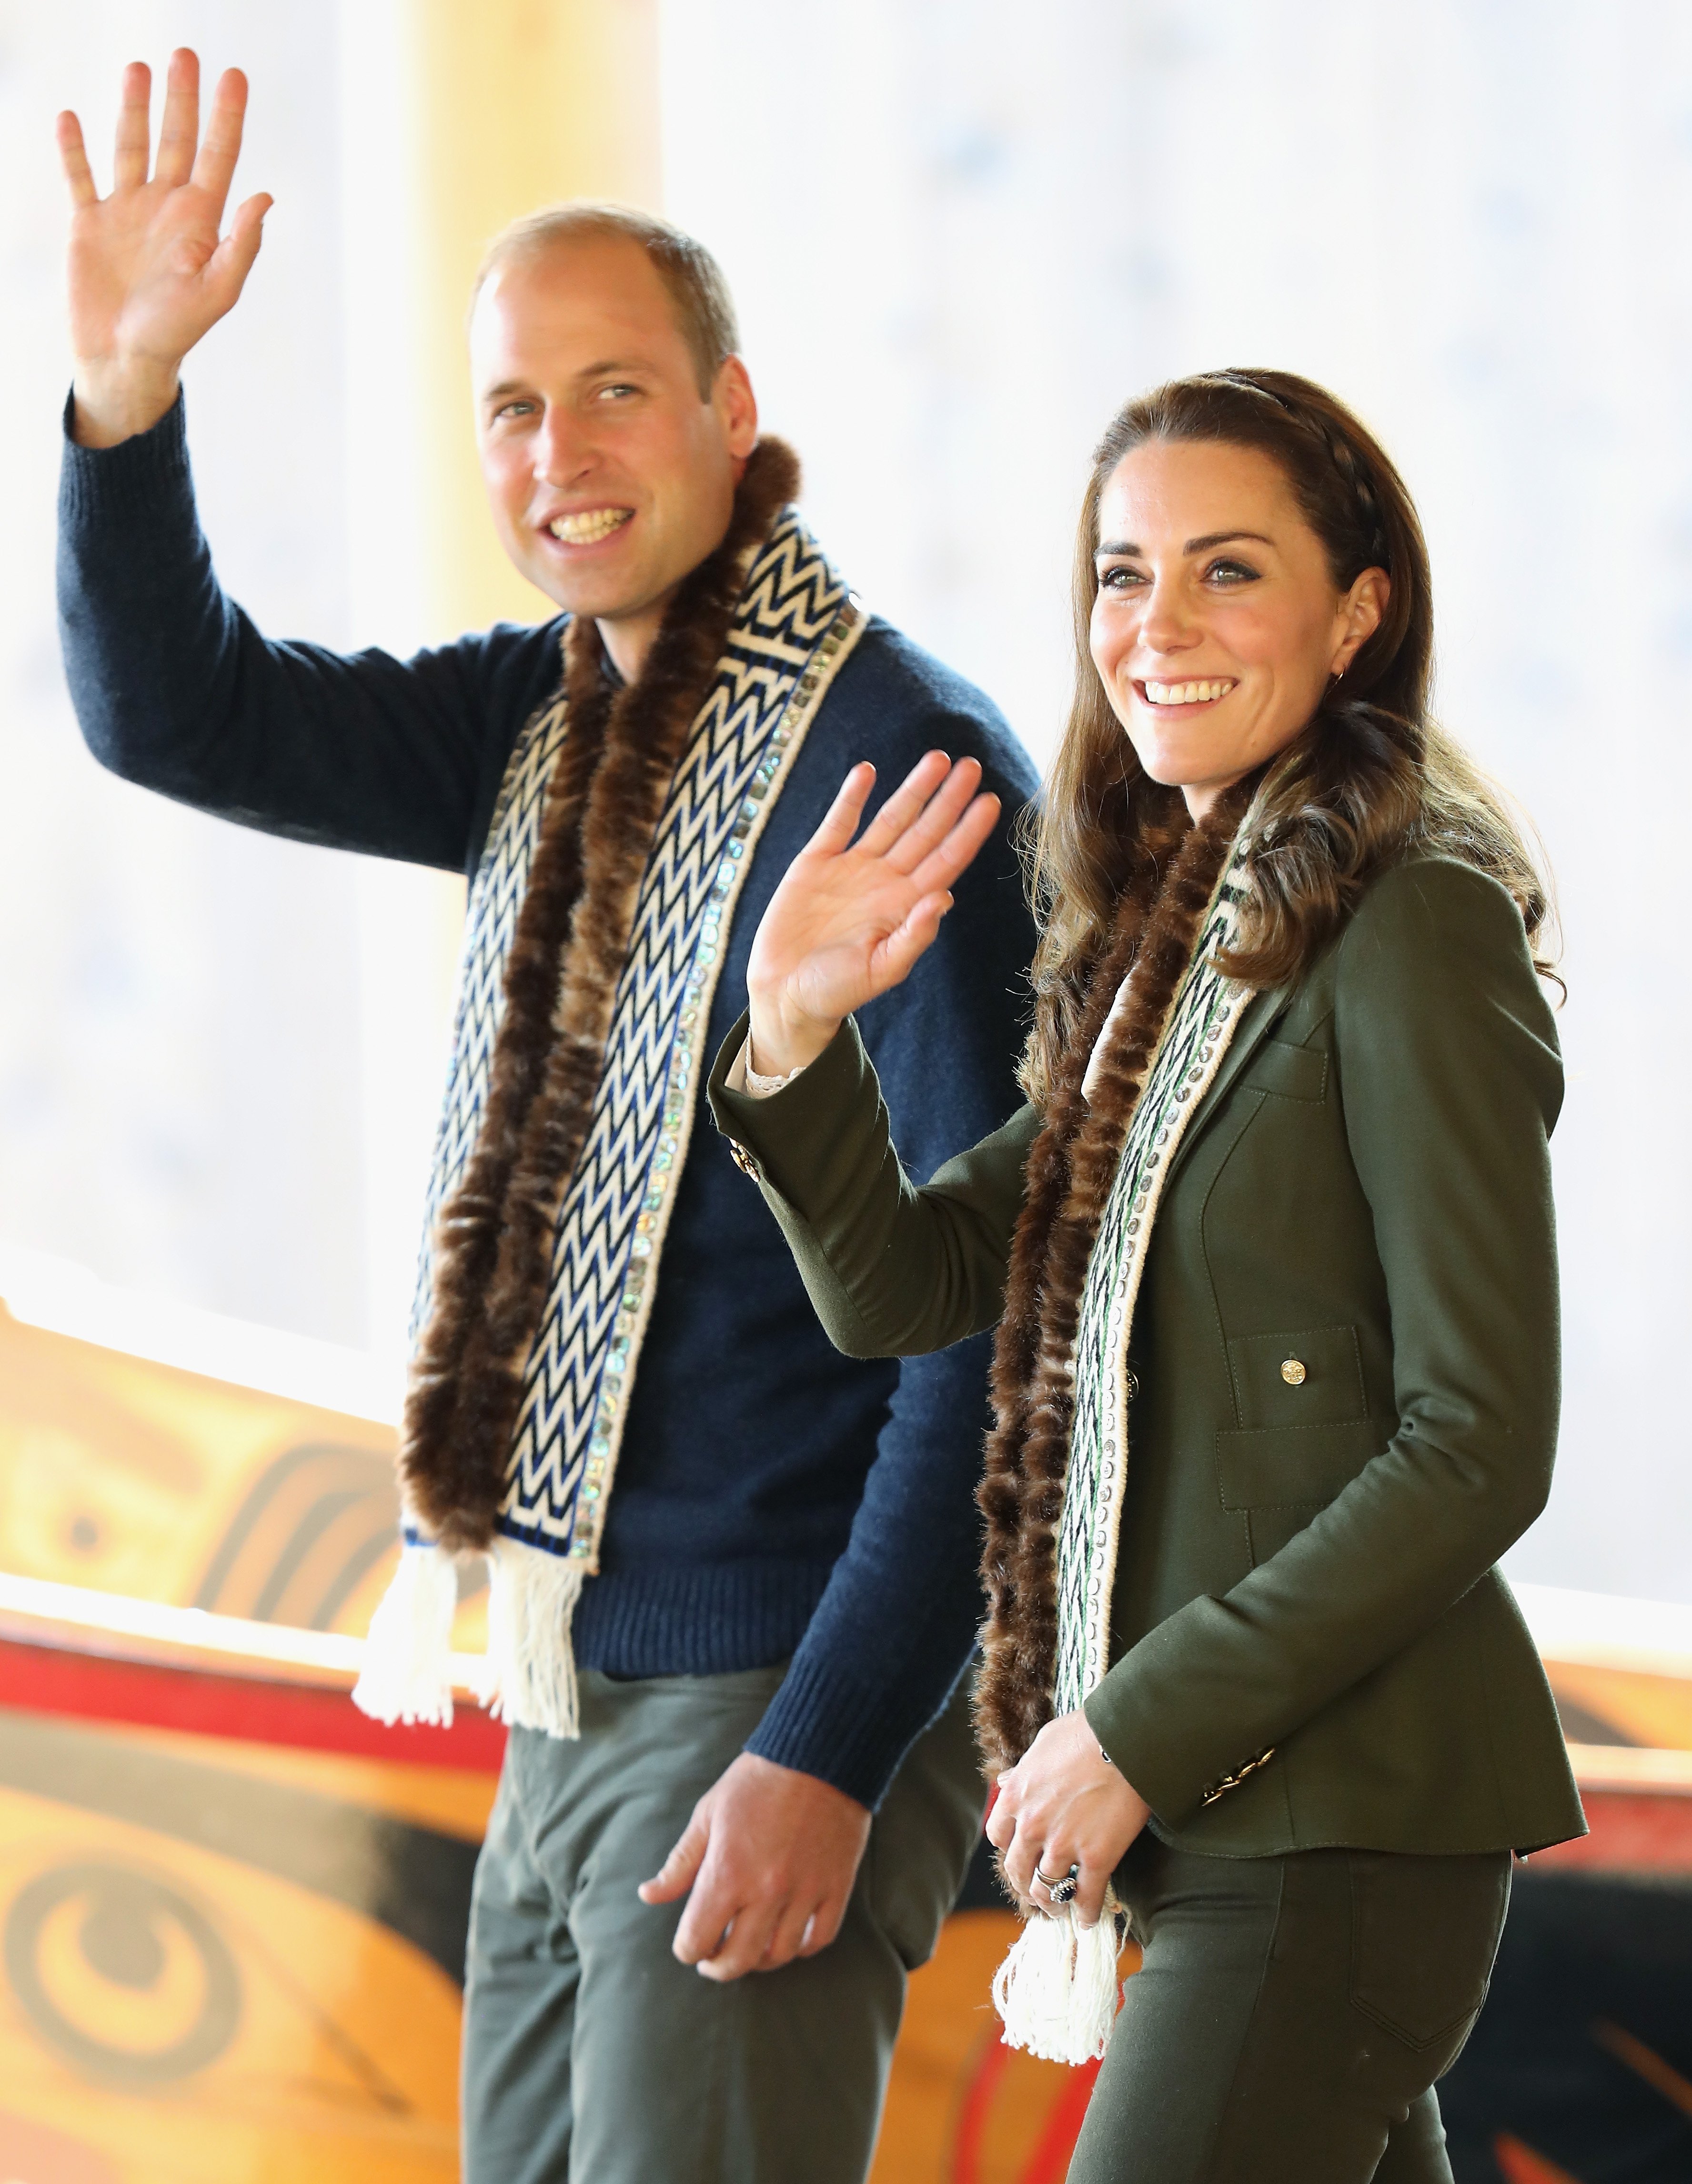 Prince William, Duke of Cambridge and Catherine, Duchess of Cambridge was as tey visit the Haida Heritage Centre during the Royal Tour of Canada on September 30, 2016 in Haida Gwaii, Canada